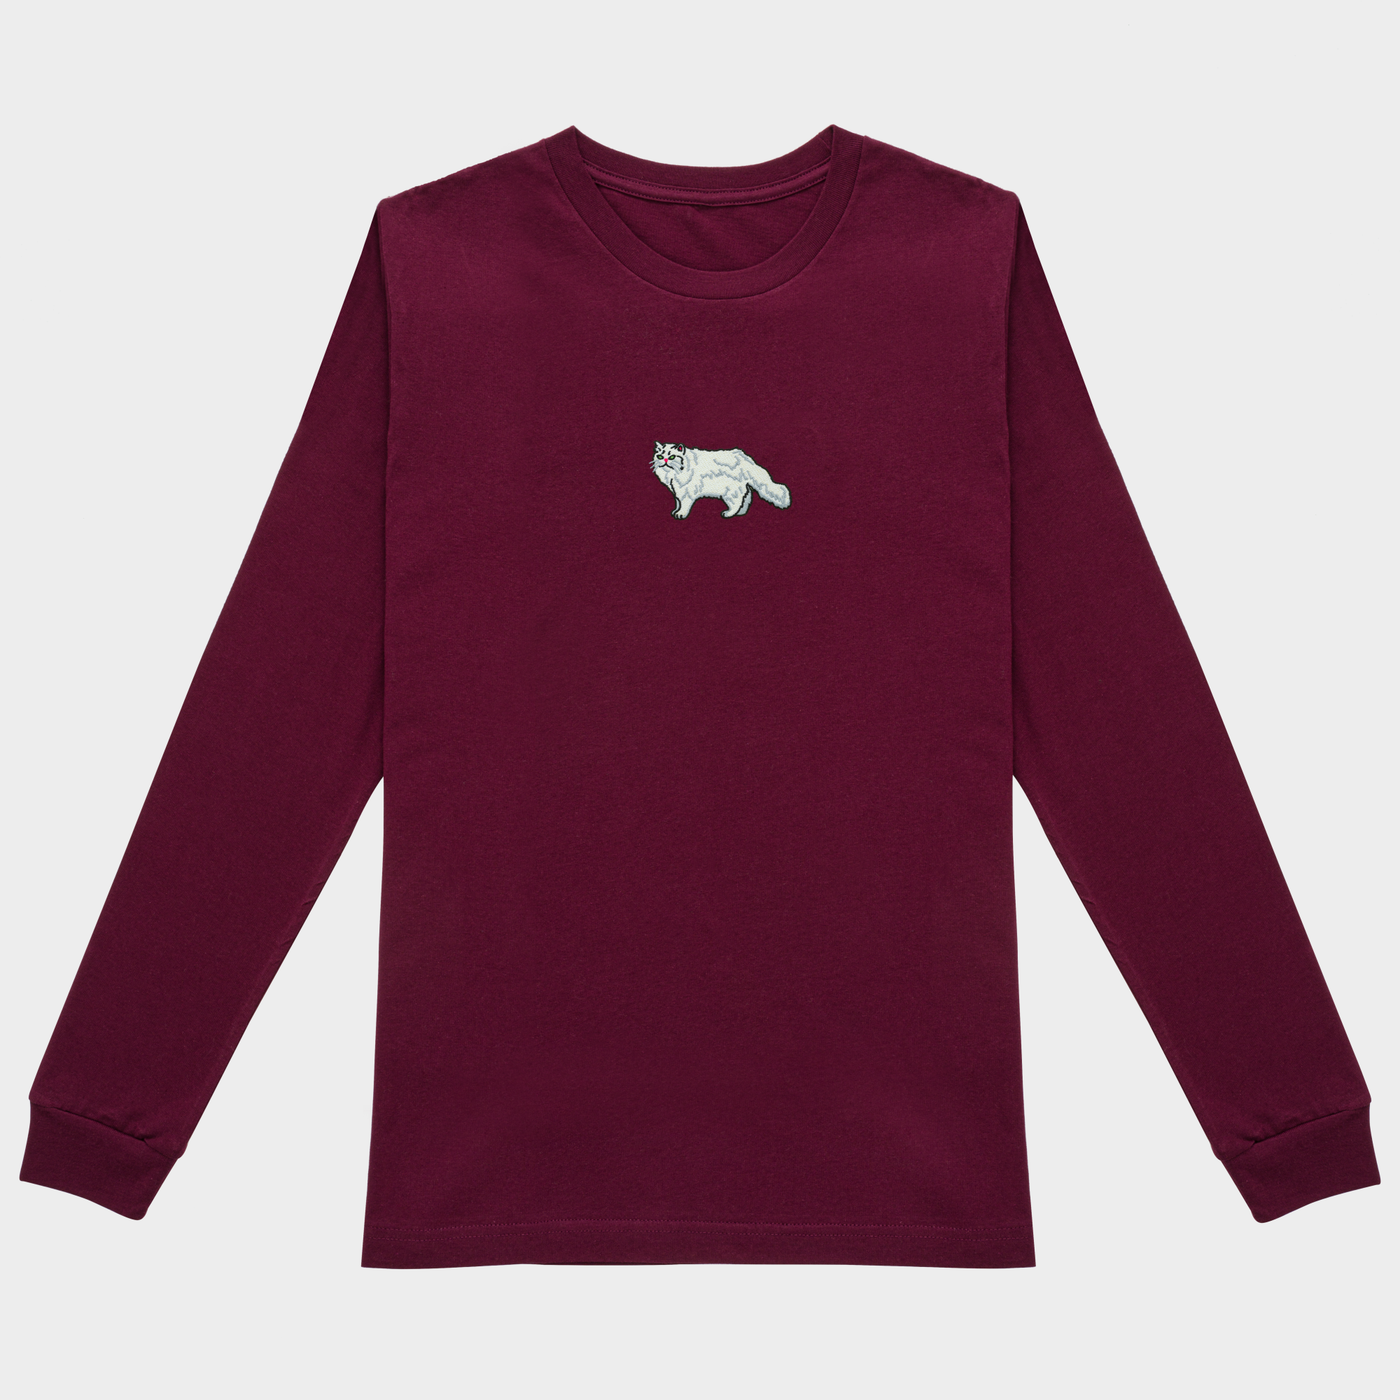 Bobby's Planet Men's Embroidered Persian Long Sleeve Shirt from Paws Dog Cat Animals Collection in Maroon Color#color_maroon